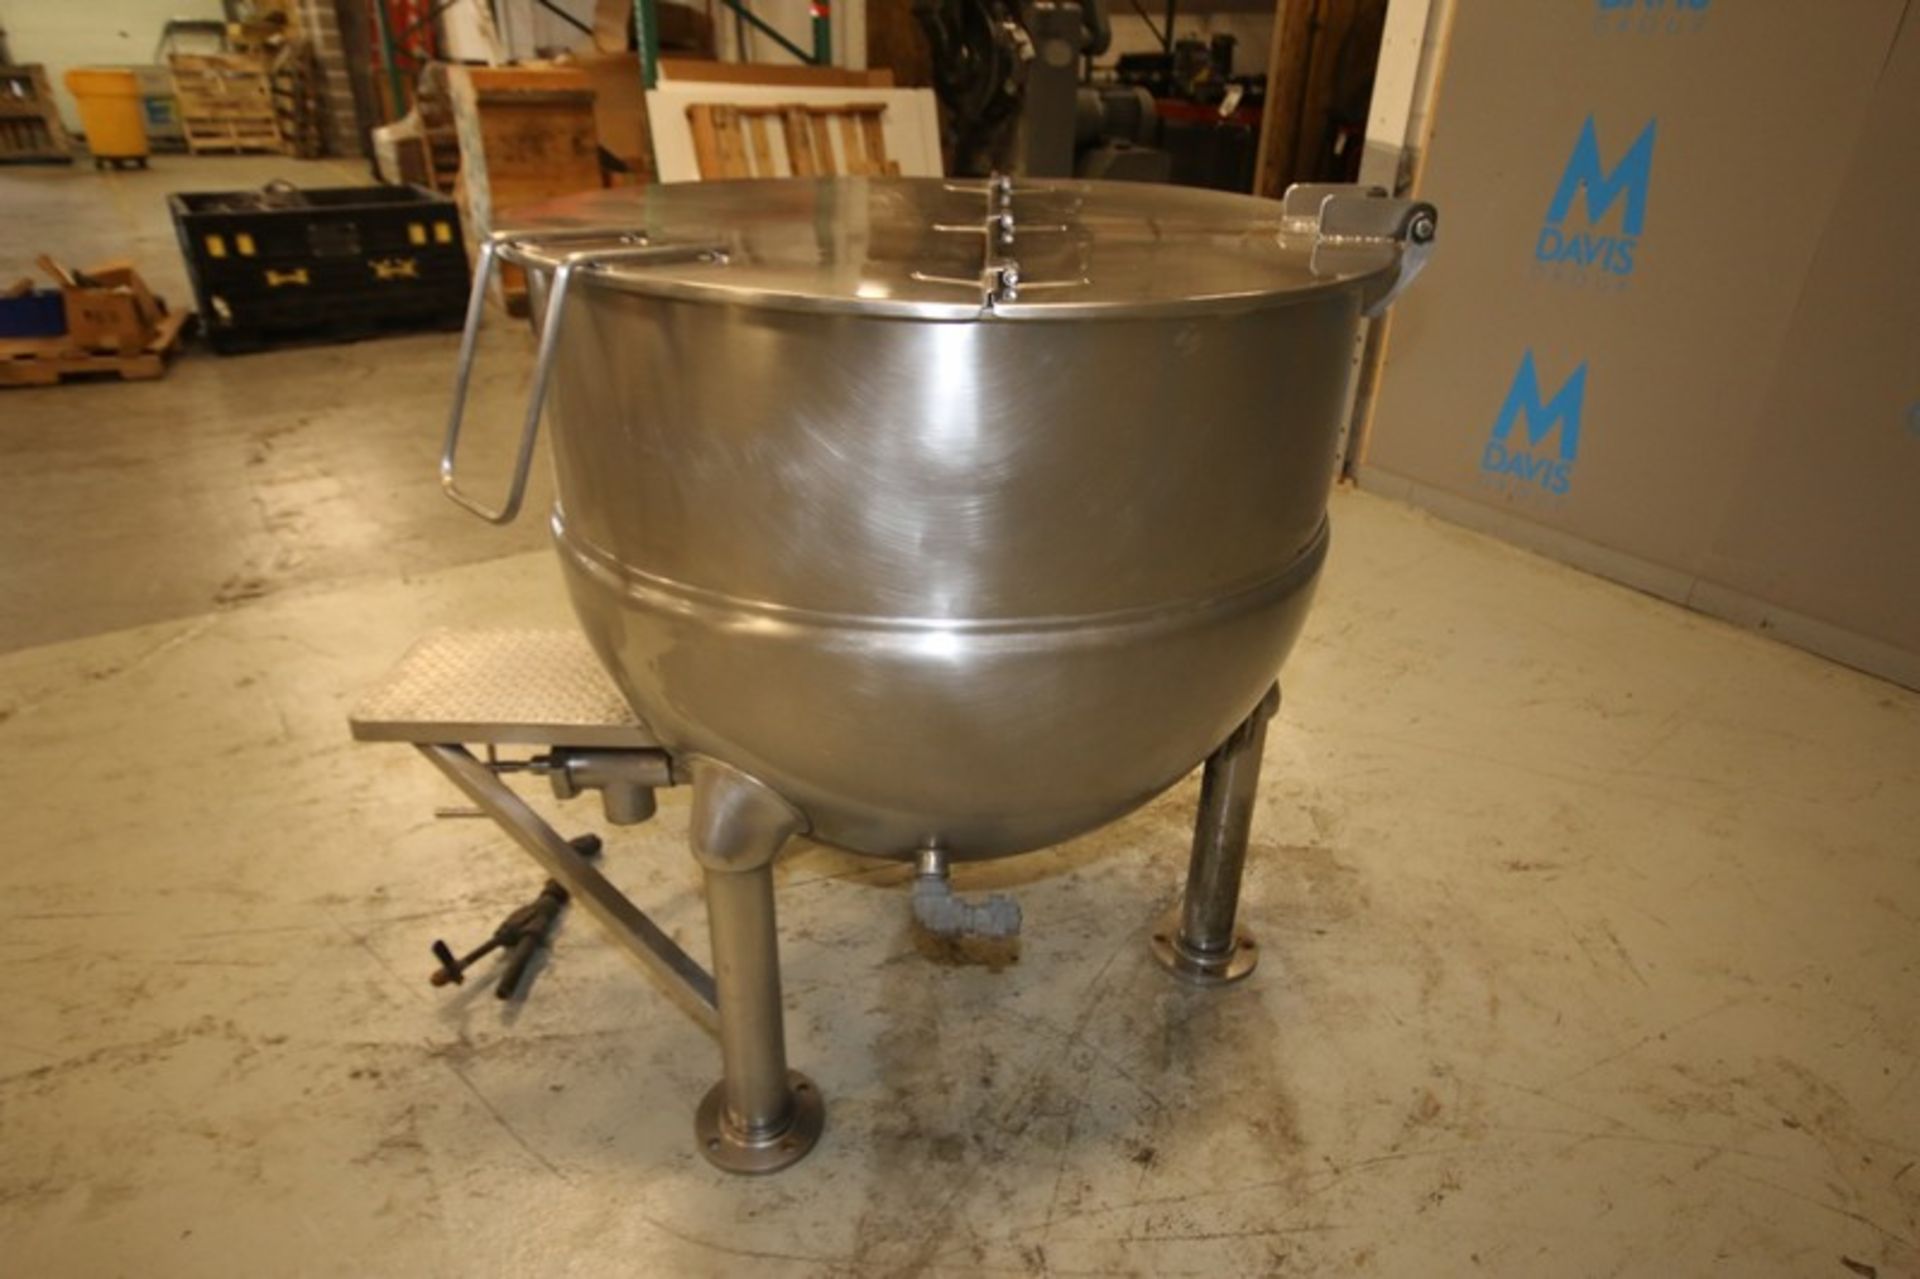 Groen 150 Gallon S/S Jacketed Kettle, Model FT-150 SN 81076-2, with Hinged Lid, 3" Threaded Bottom - Image 3 of 7